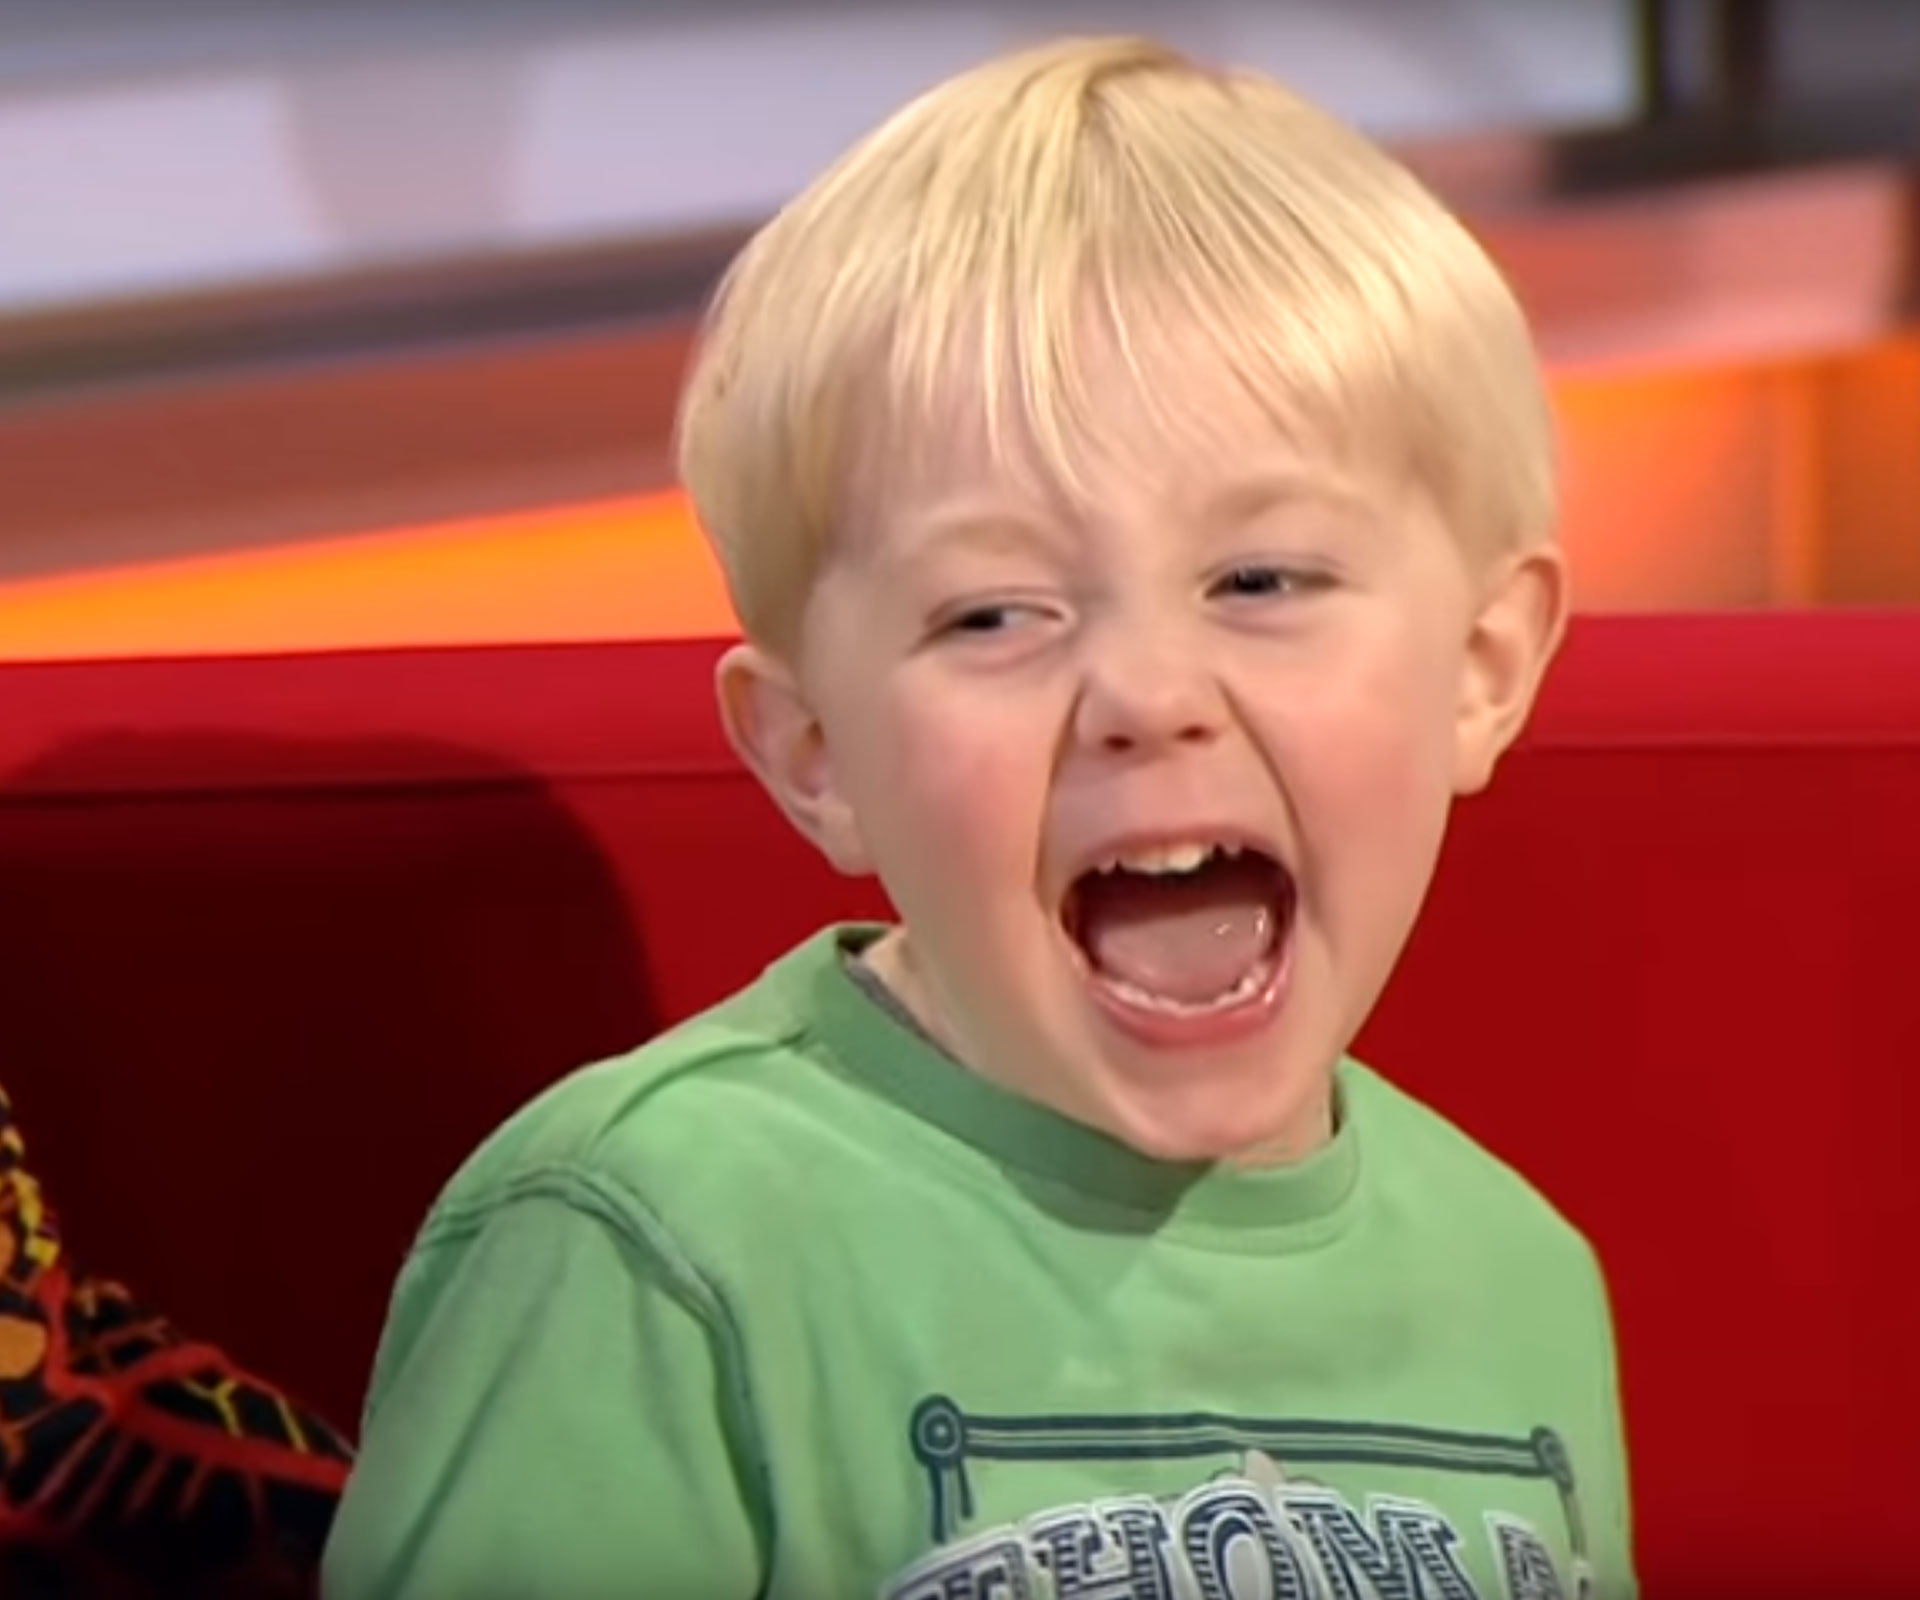 4-year-old’s joy at seeing himself on TV